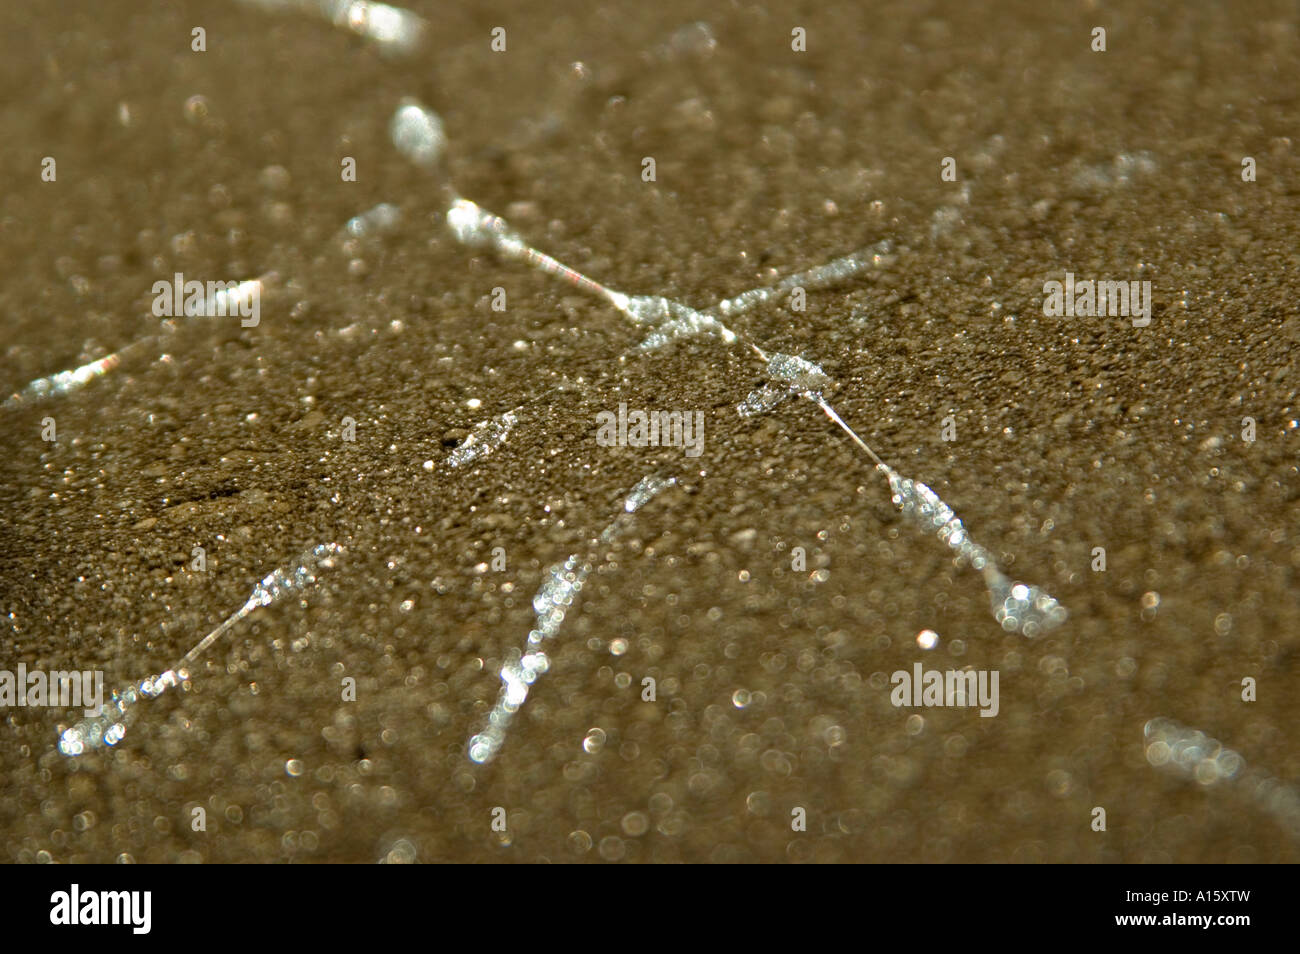 Horizontal abstract close up of slimy snail trails creating a criss cross pattern on a garden path. Stock Photo